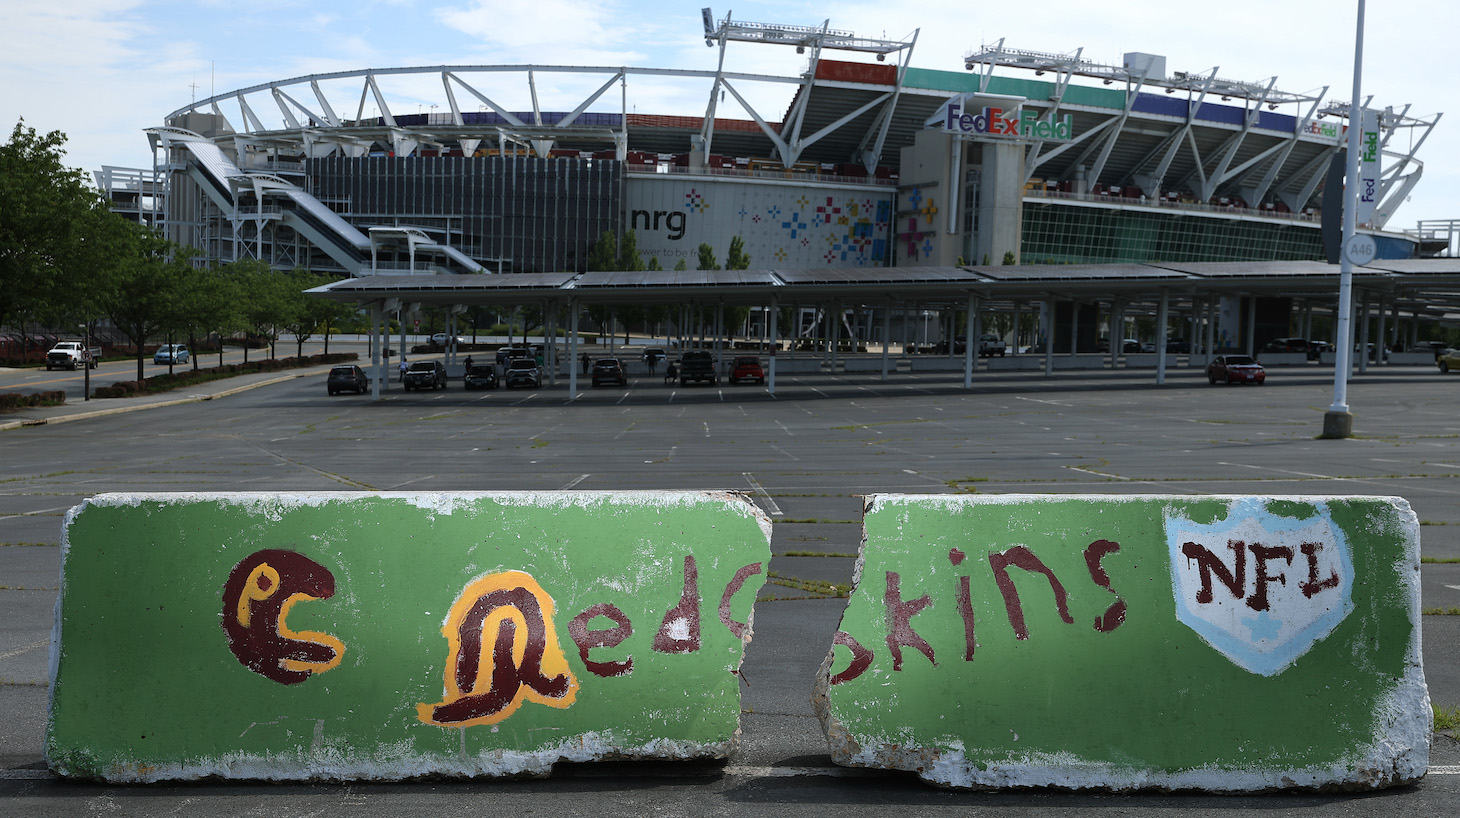 LANDOVER, MARYLAND - JULY 13: Hand painted concrete barriers stand in the parking lot of FedEx Field, home of the NFL's Washington Redskins team July 13, 2020 in Landover, Maryland. The team announced Monday that owner Daniel Snyder and coach Ron Rivera are working on finding a replacement for its racist name and logo after 87 years. (Photo by Chip Somodevilla/Getty Images)